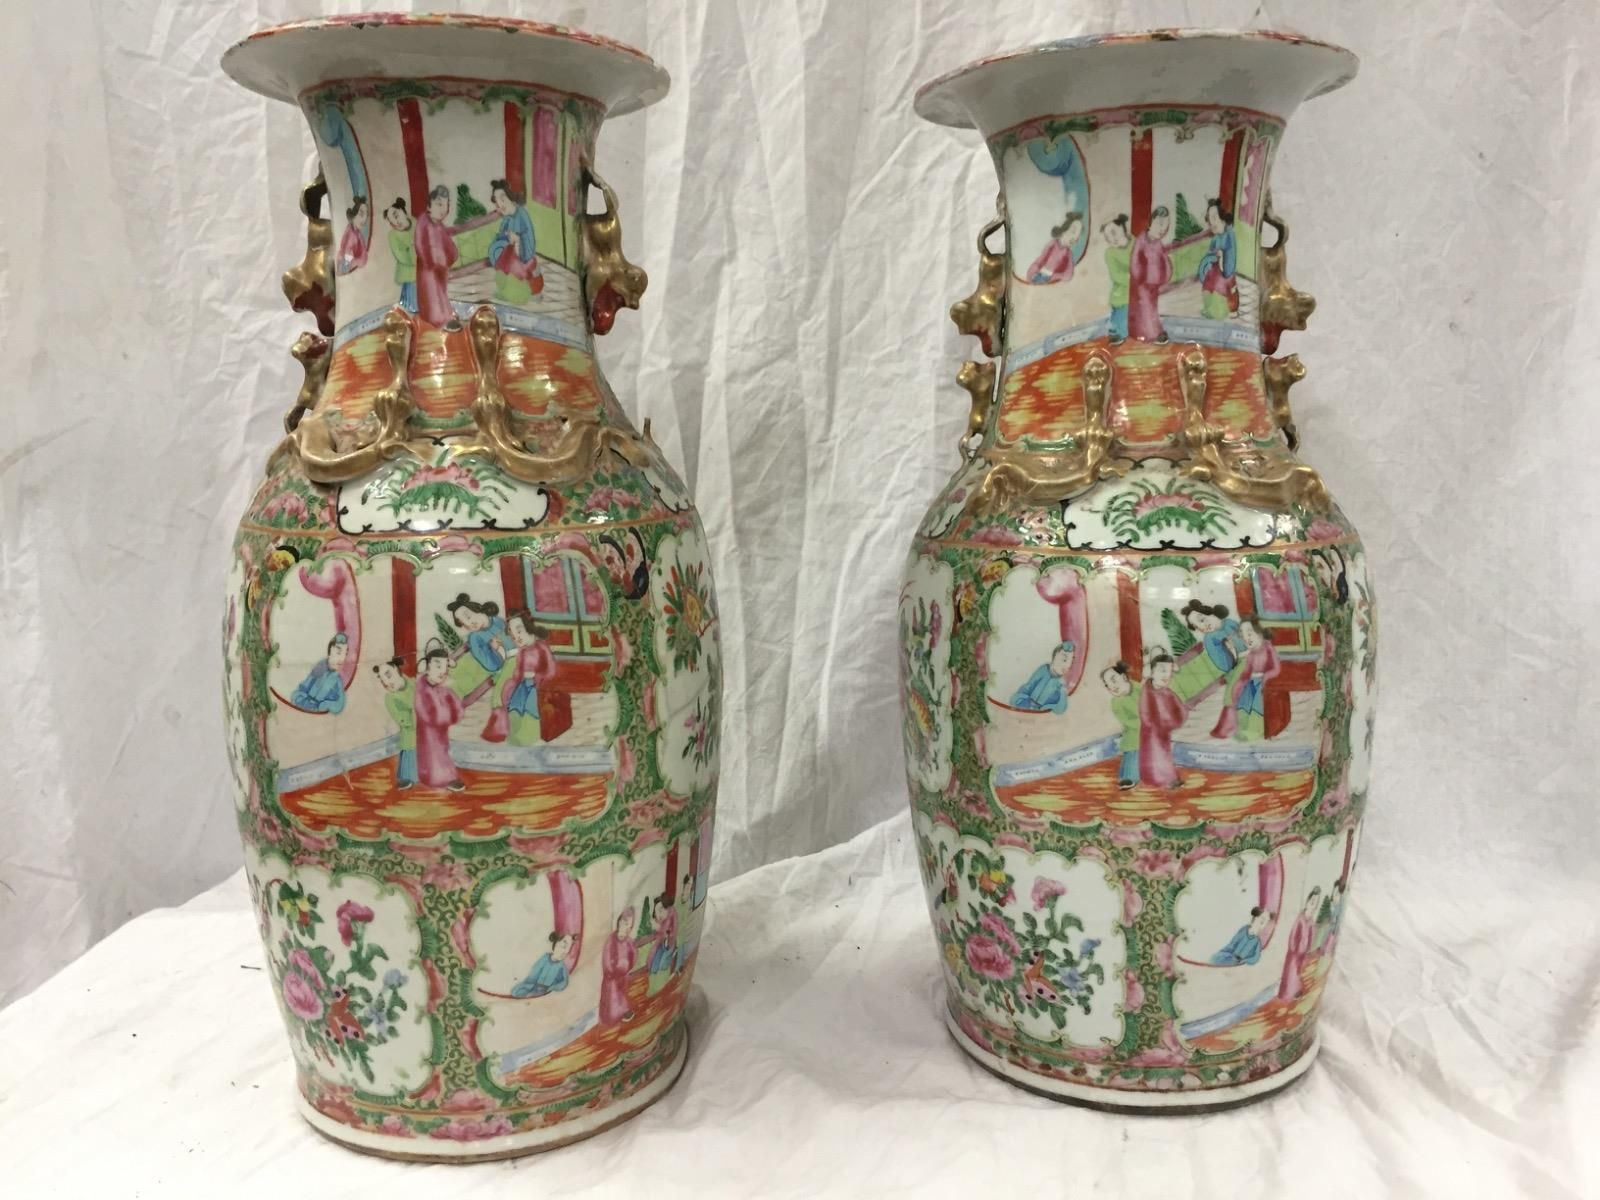 30 Wonderful Chinese Vases for Sale Uk 2024 free download chinese vases for sale uk of 22 large chinese vases for the floor the weekly world pertaining to 22 large chinese vases for the floor